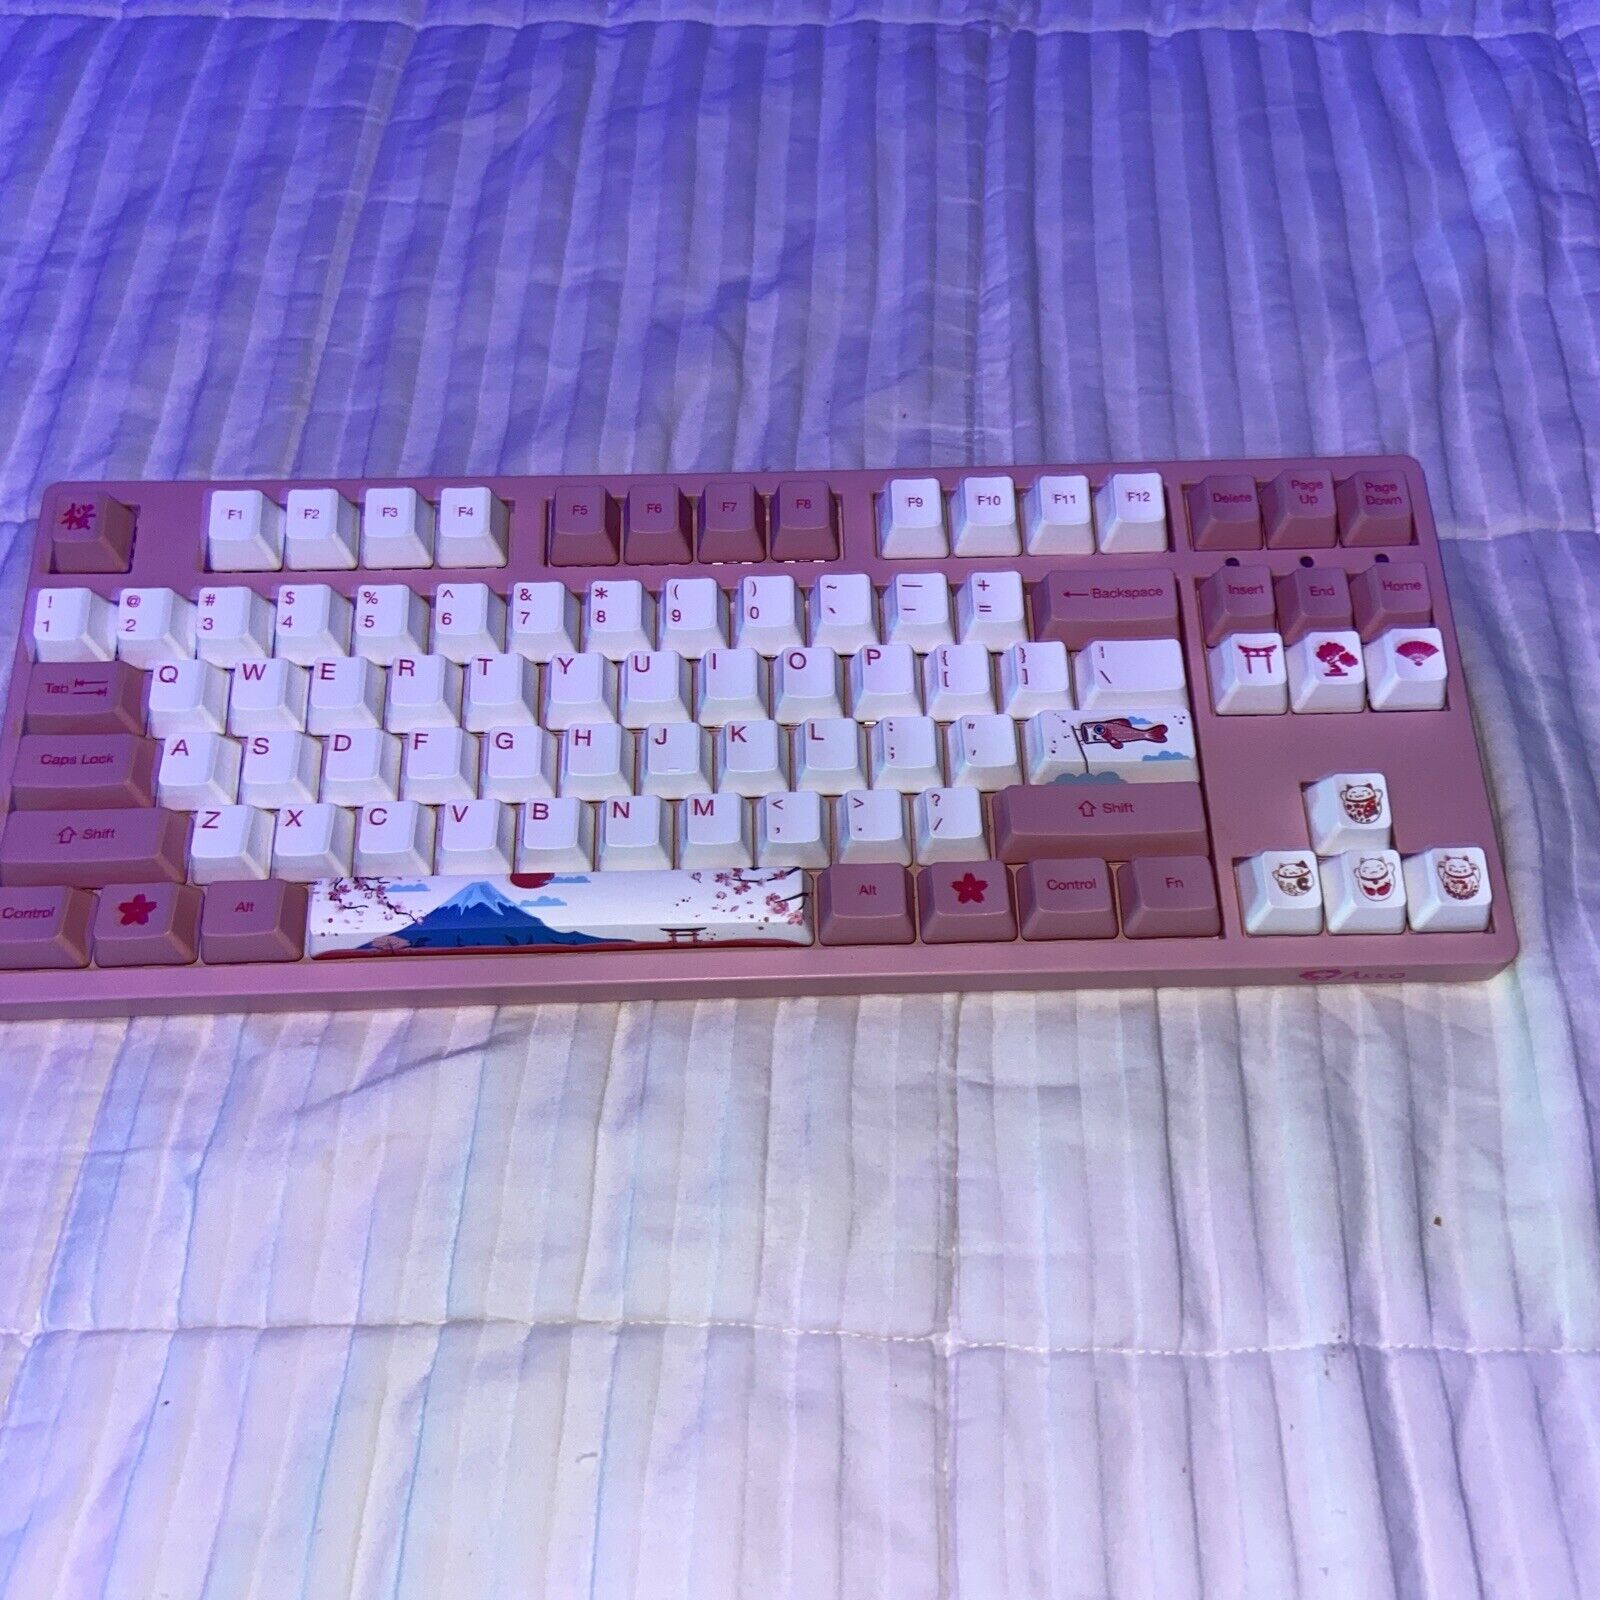 modded mechanical keyboard With Lubed Akko Pink Switches, And Lubed Stabilizers